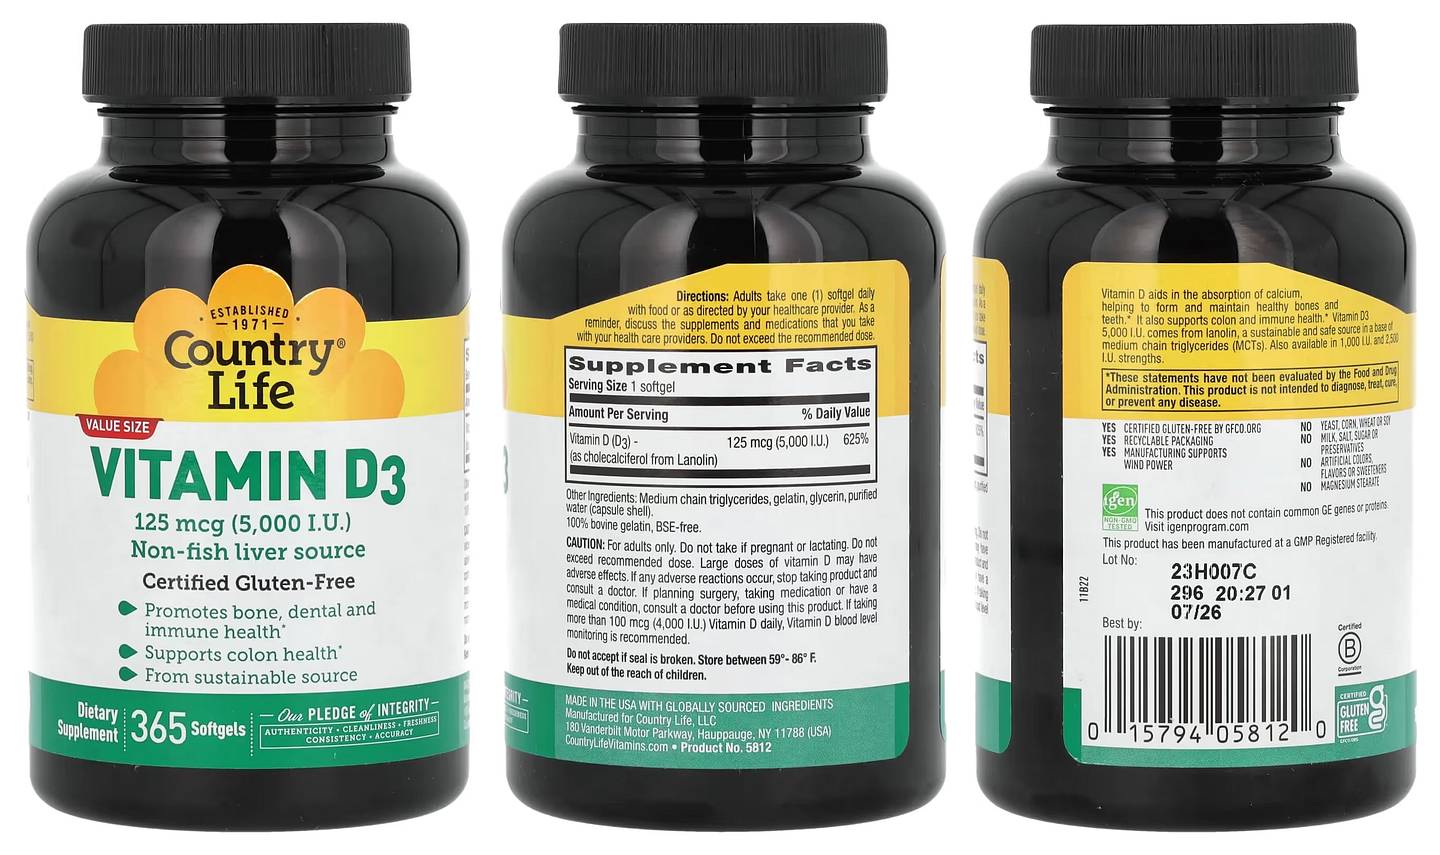 Country Life, Vitamin D3 packaging